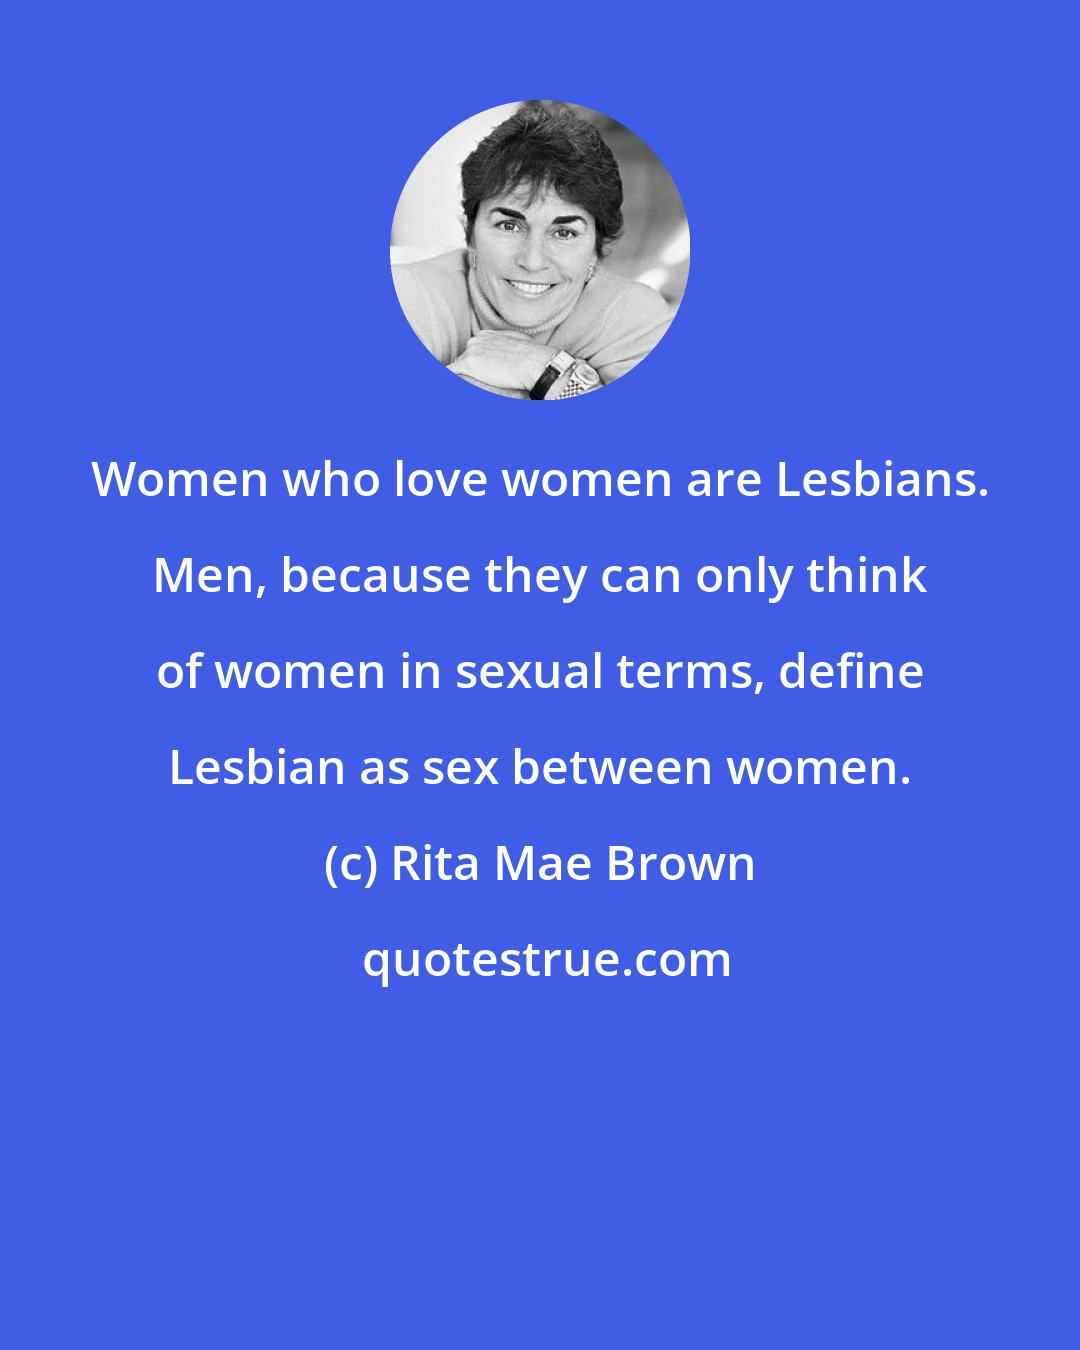 Rita Mae Brown: Women who love women are Lesbians. Men, because they can only think of women in sexual terms, define Lesbian as sex between women.